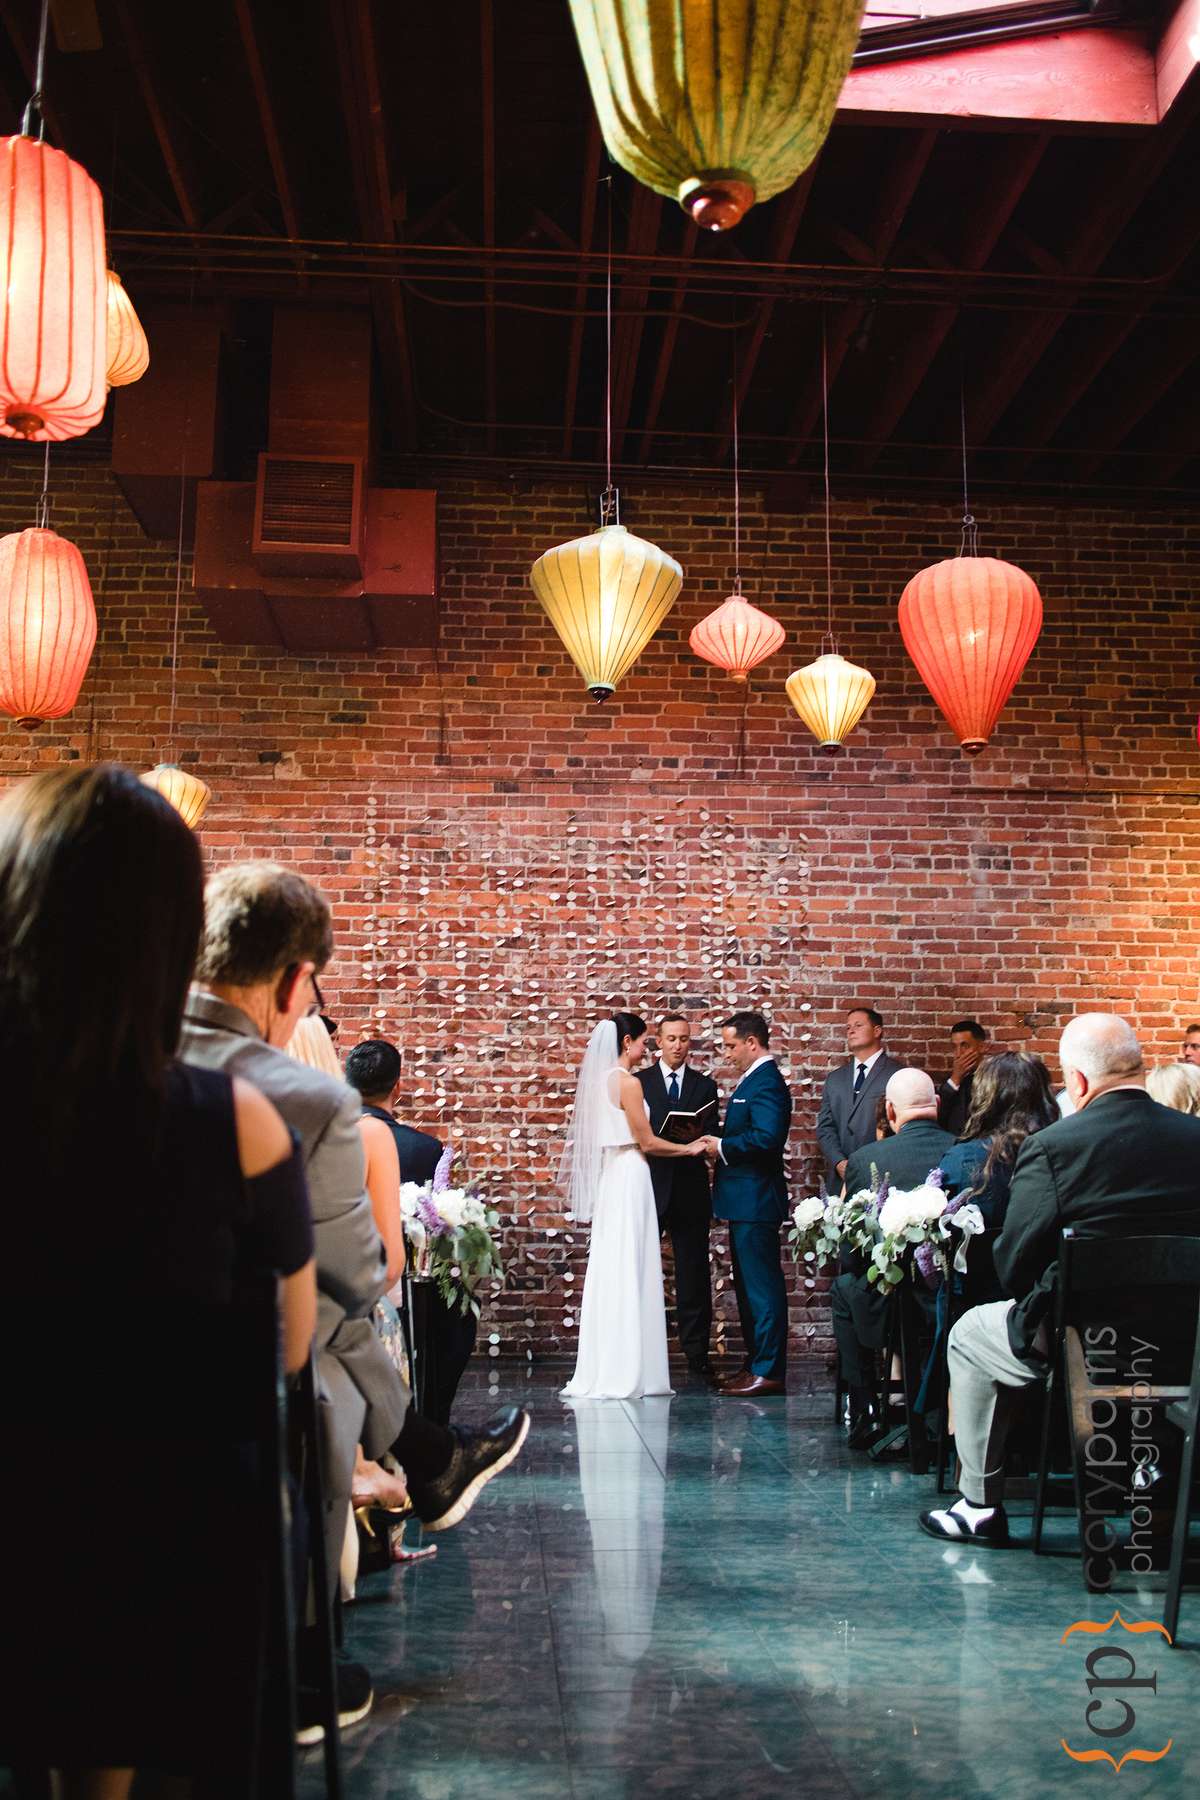  Wedding ceremony at the Georgetown Ballroom. Photo by Alyssa Parris. 